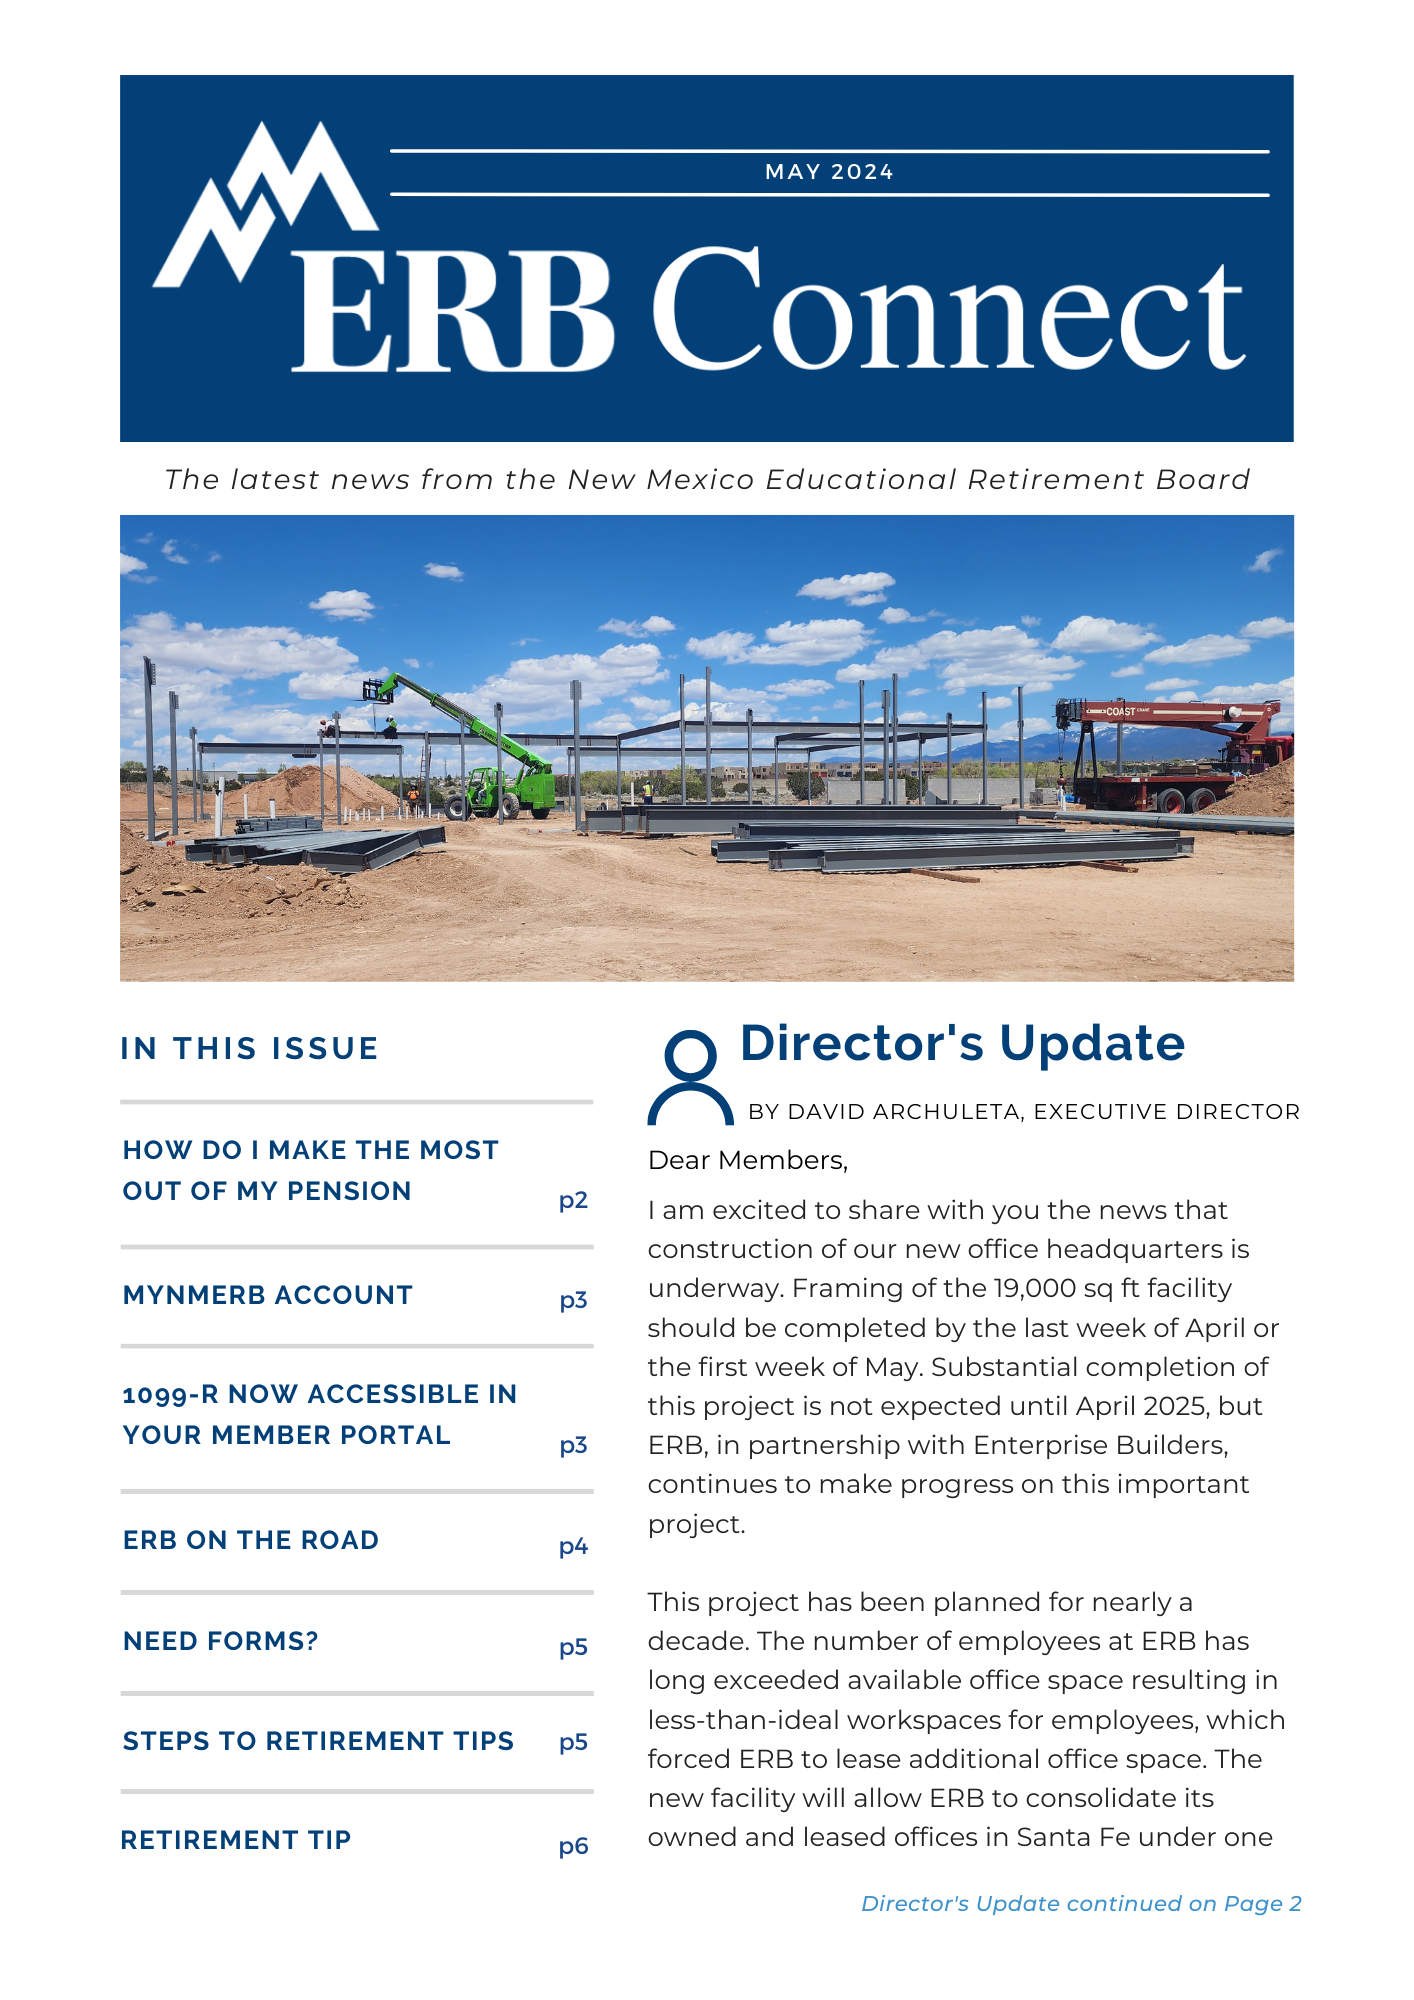 Image of the ERB Connect May 2024 page one